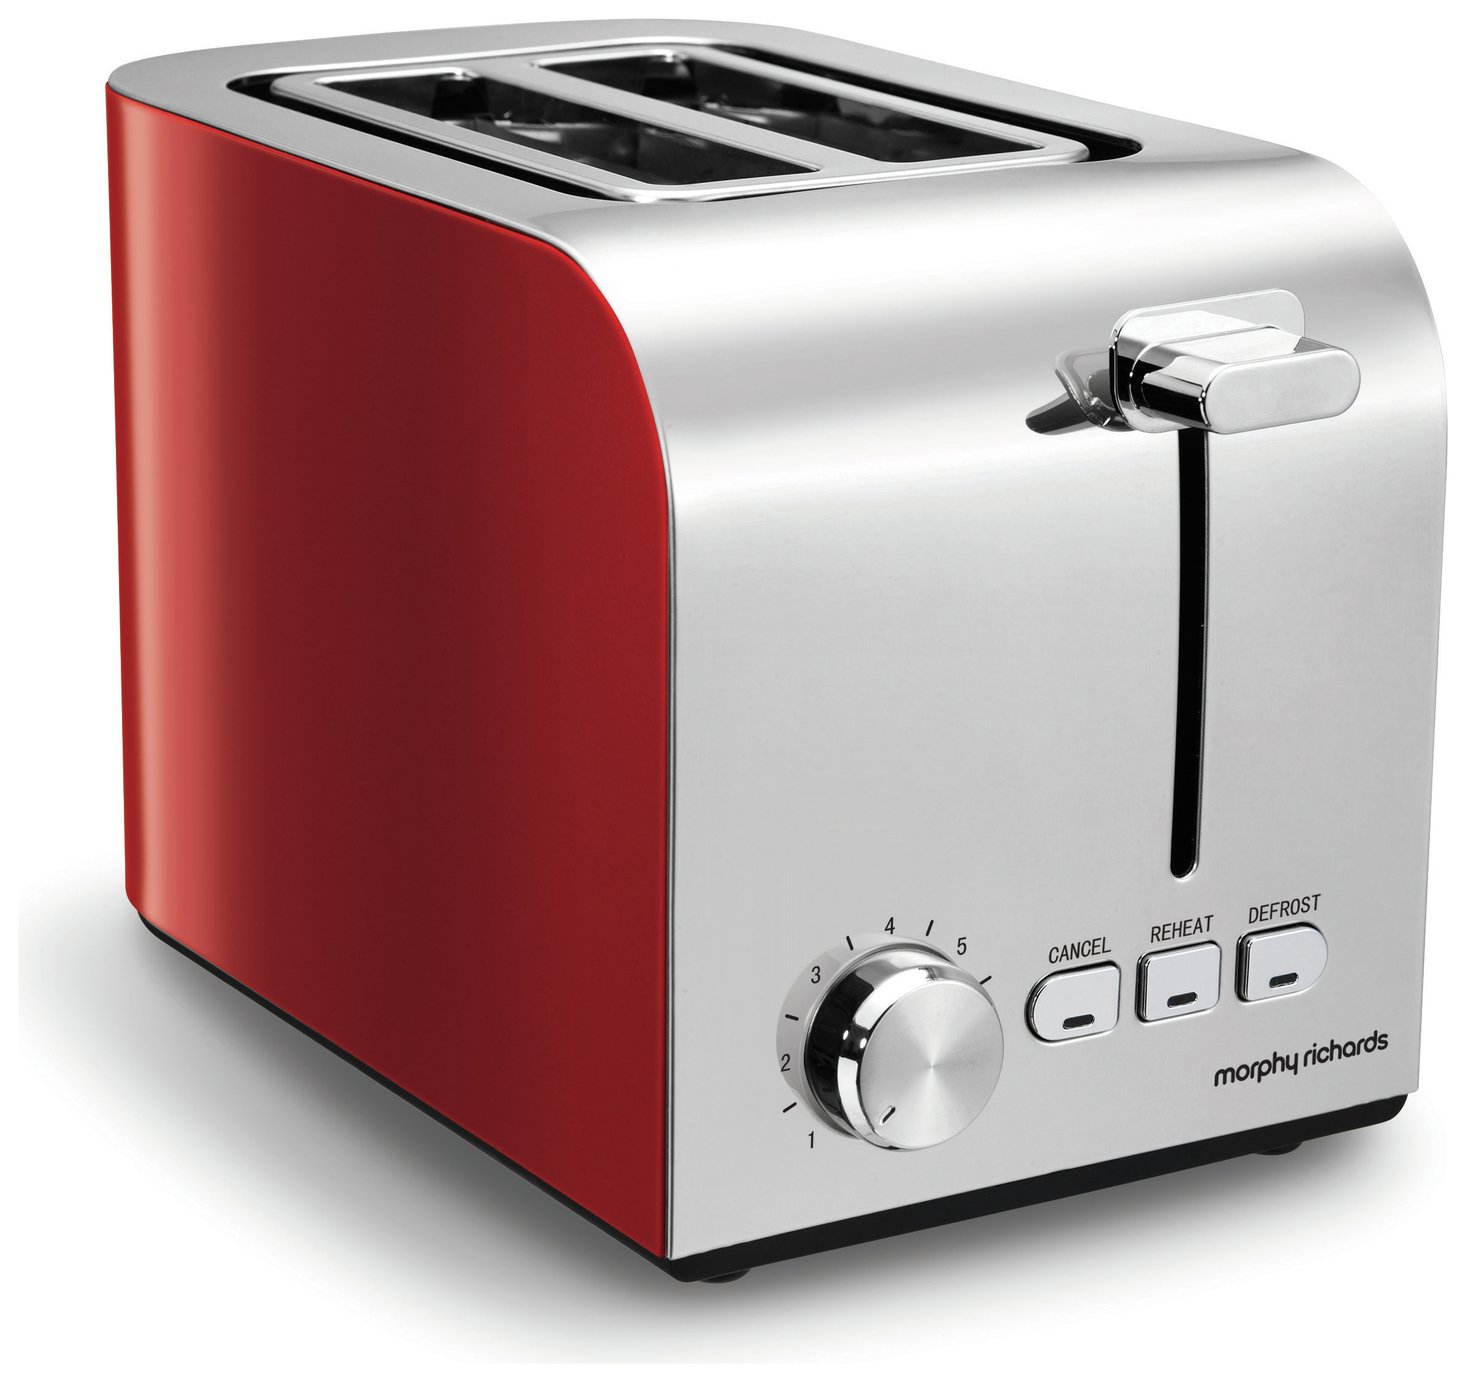 Morphy Richards 222056 Equip 2 Slice Toaster - Red